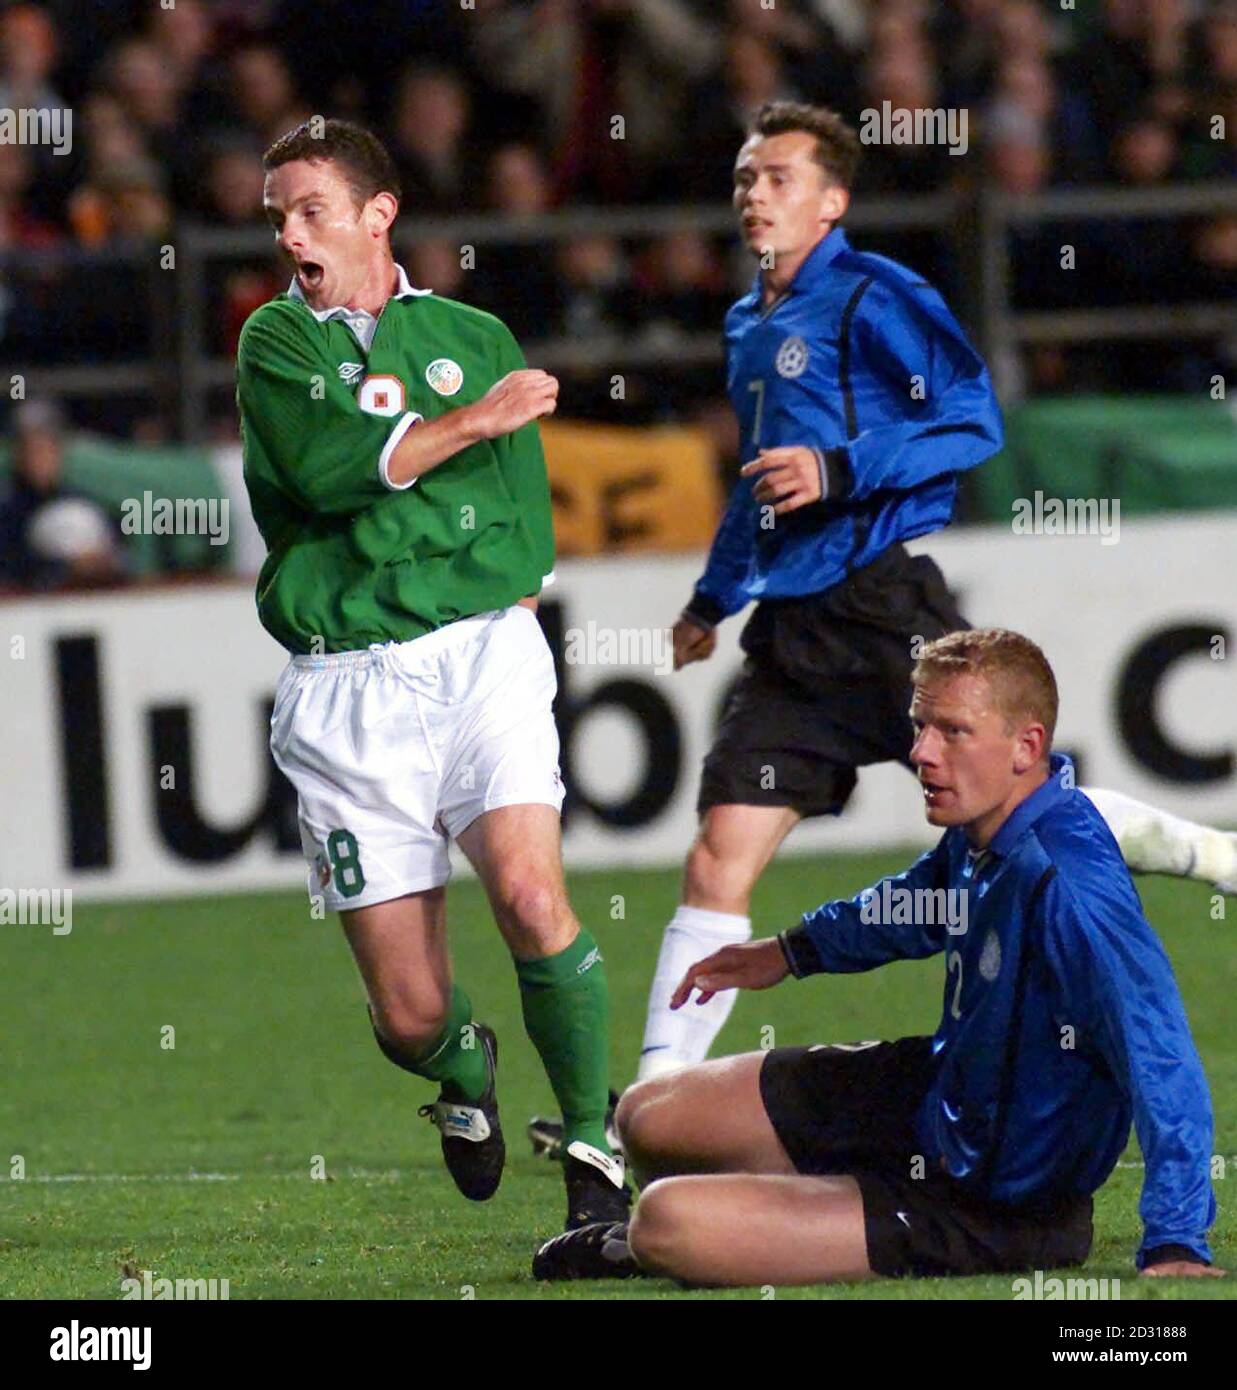 Estonia's Marek Lamslau (on ground) and Sergei Terehhov can only watch as Mark Kinsella scores for the Republic of Ireland during their World Cup Qualifying match at Lansdowne Road, Dublin. Stock Photo